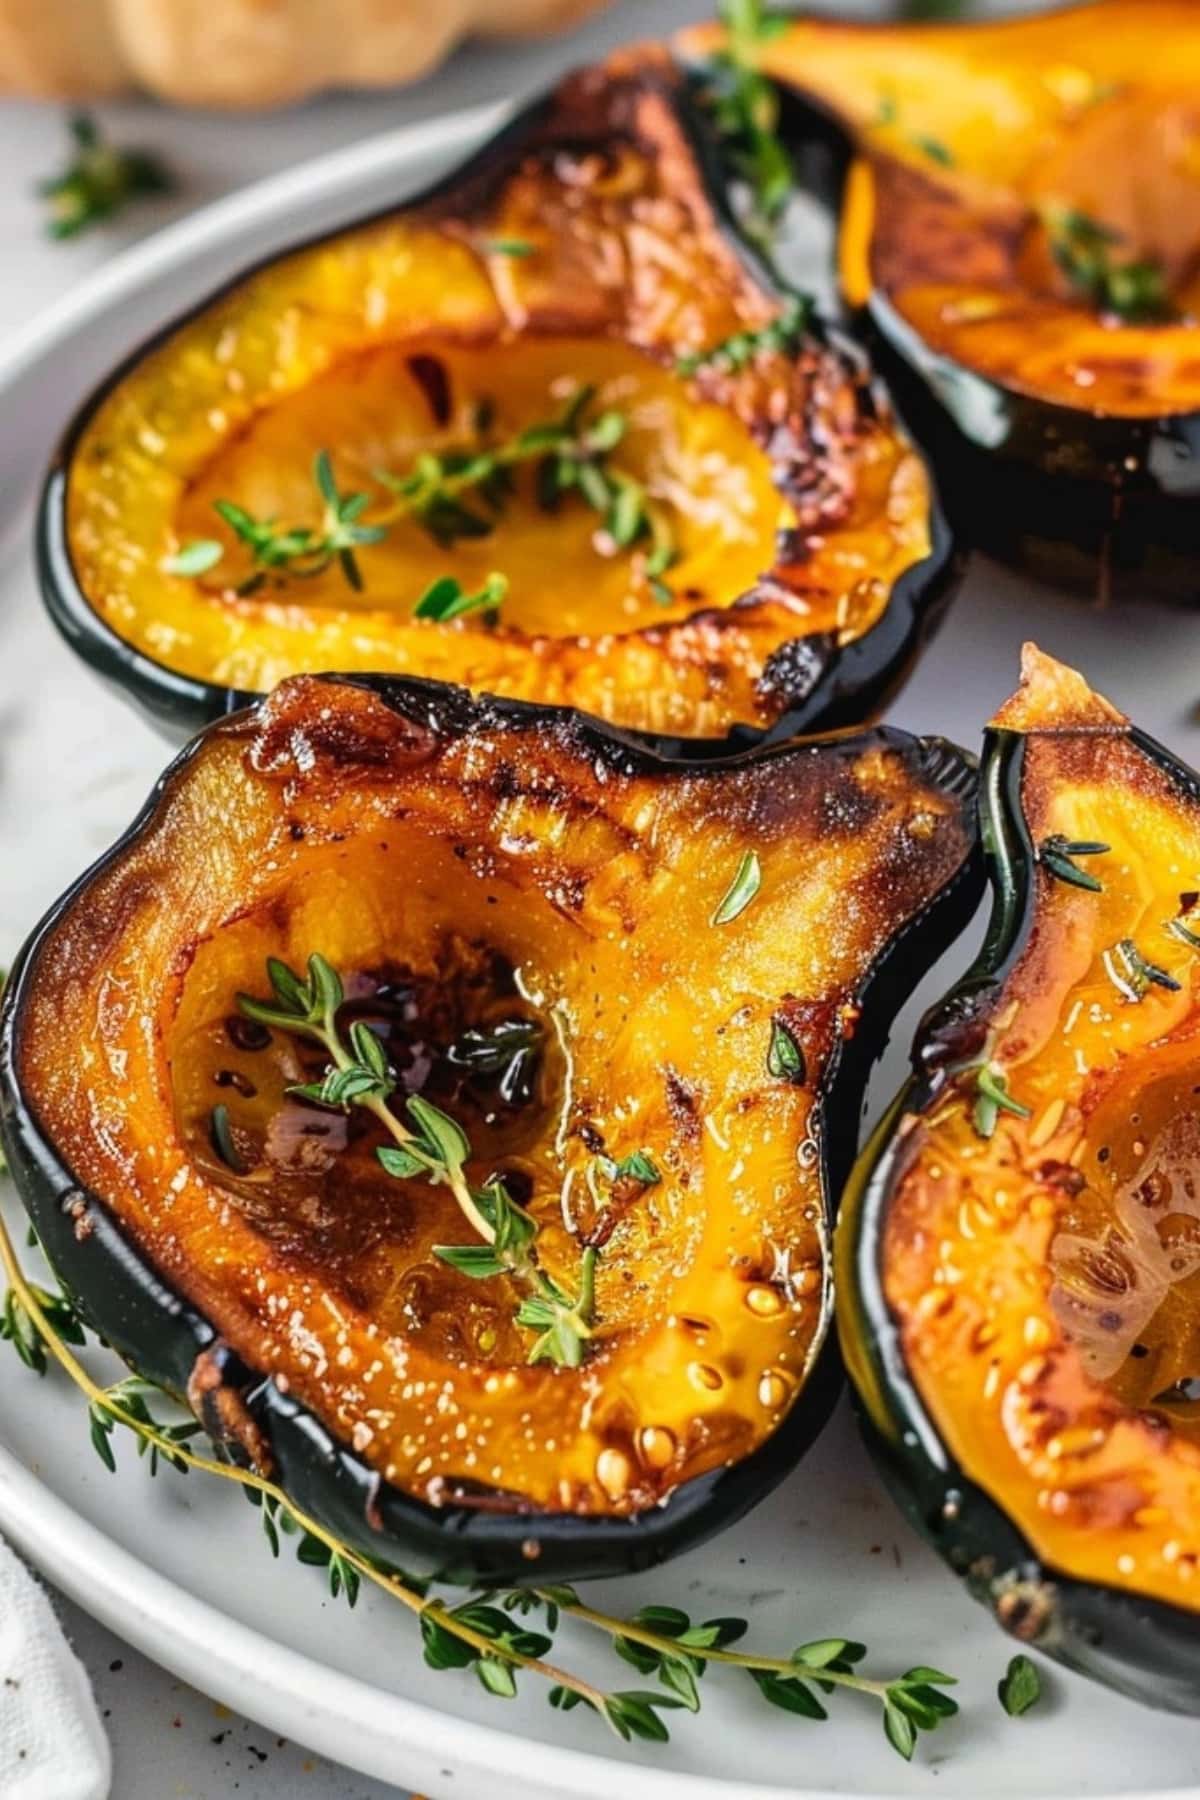 Air fried sliced in half acorn squash served on a white plate with rosemary leaves garnish.